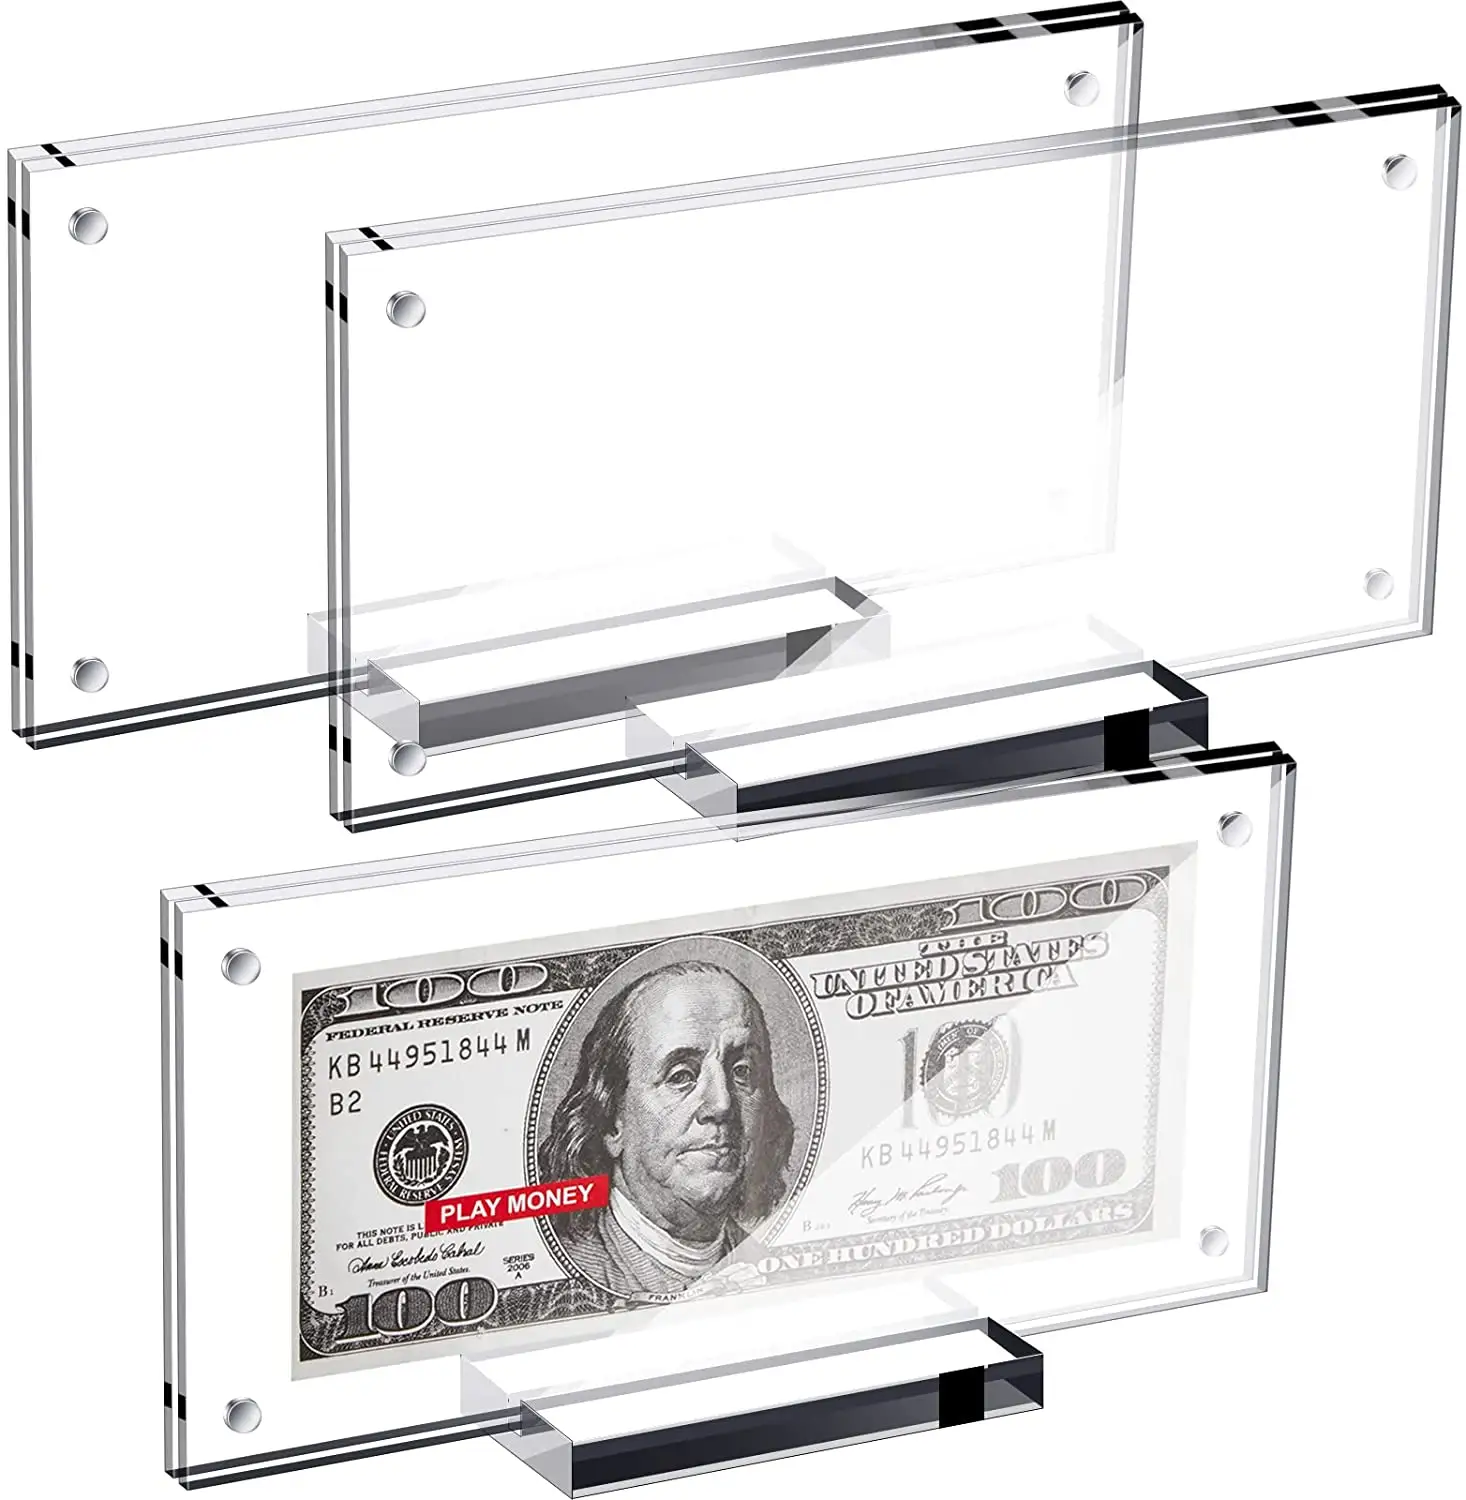 Bill Clear Holders Currency PVC Holder Transparent Bill Sleeves Currency Bill Display Holder for Regular Bills Protector Case Supplies 10 6.9 x 2.95 Inch 